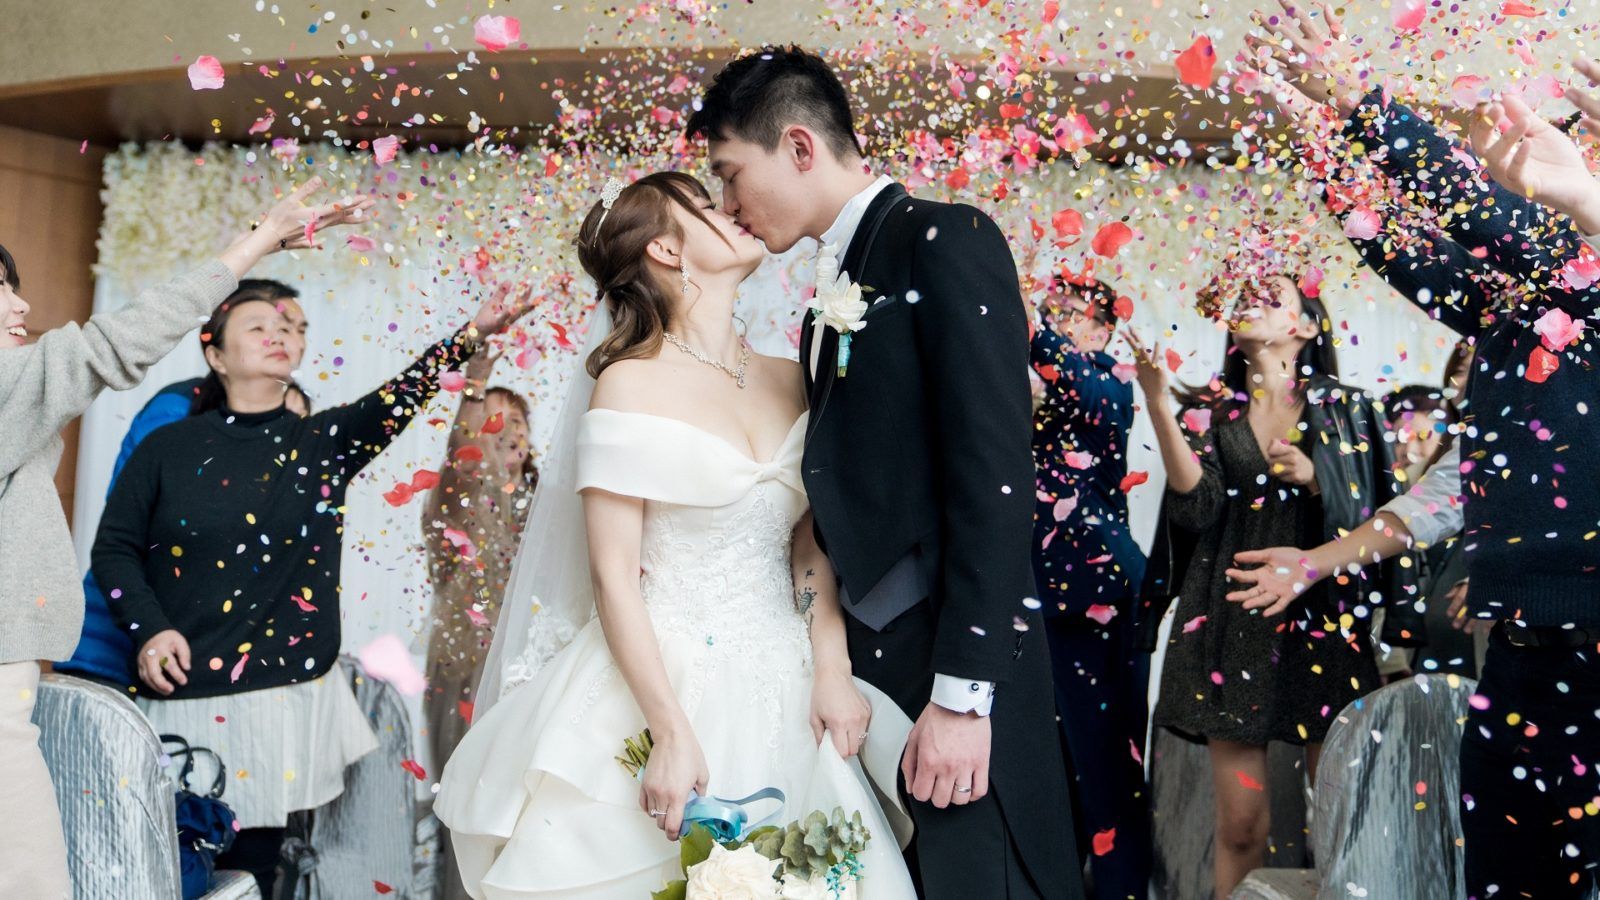 A Simple Guide On How To Get Married In Hong Kong